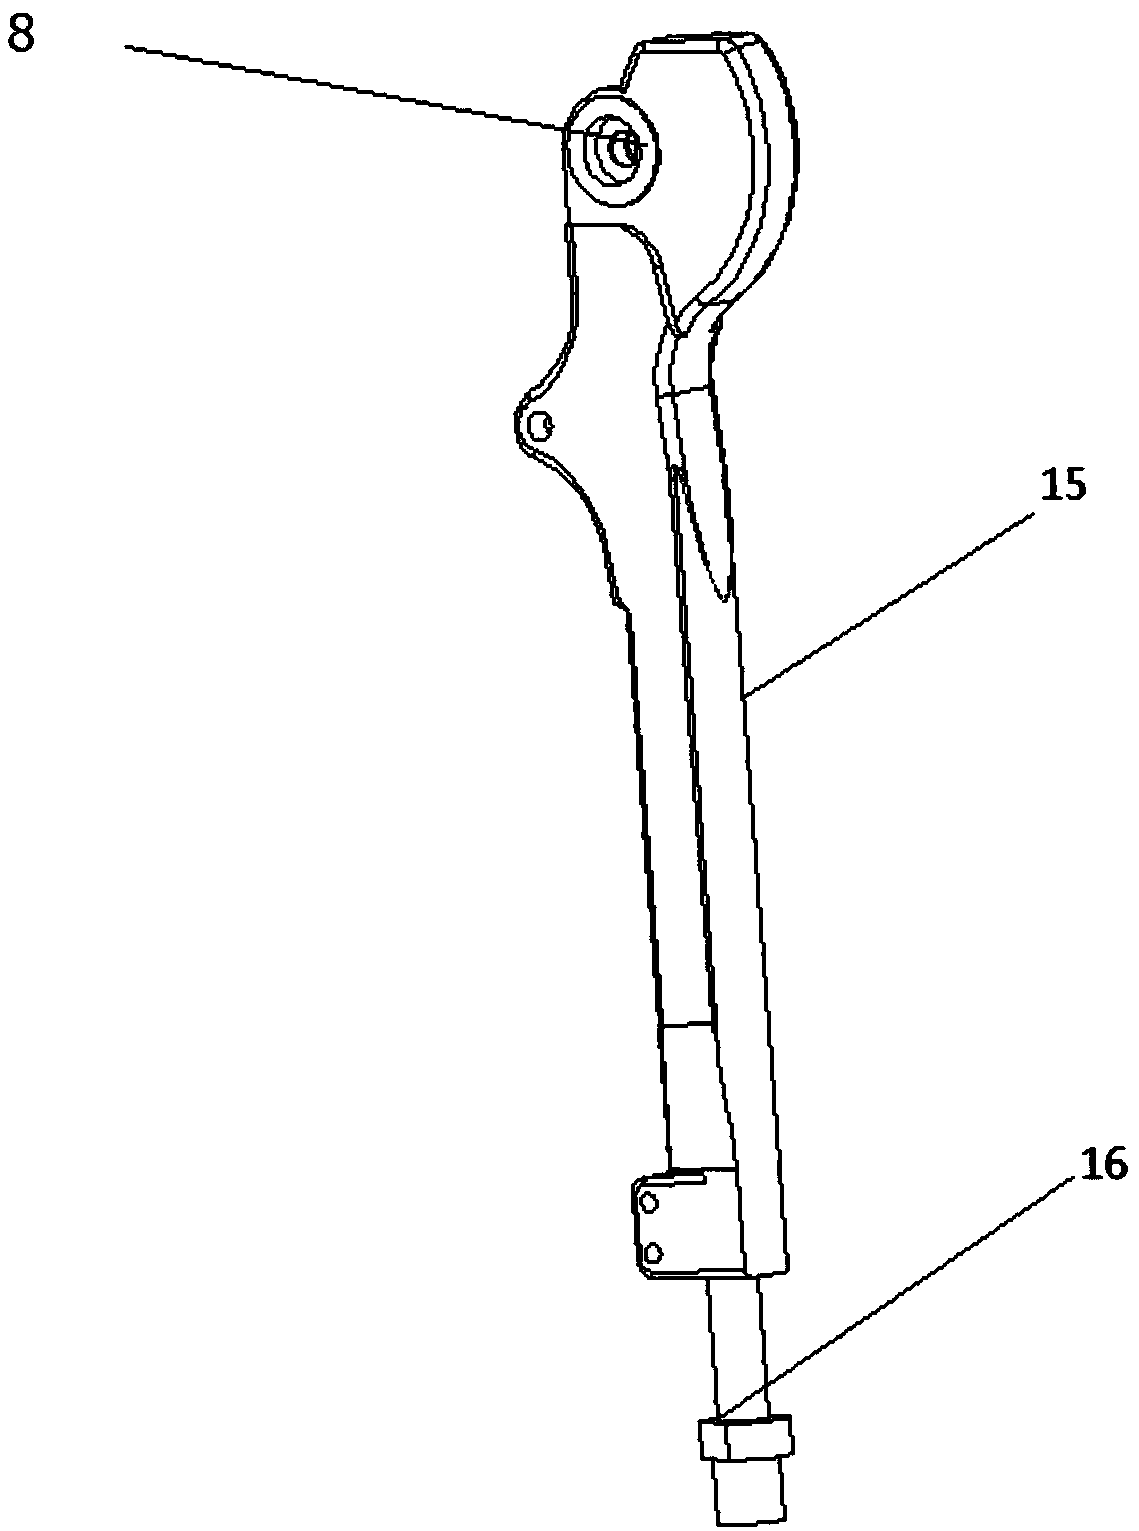 An assisted lightweight integrated multi-degree-of-freedom lower extremity exoskeleton